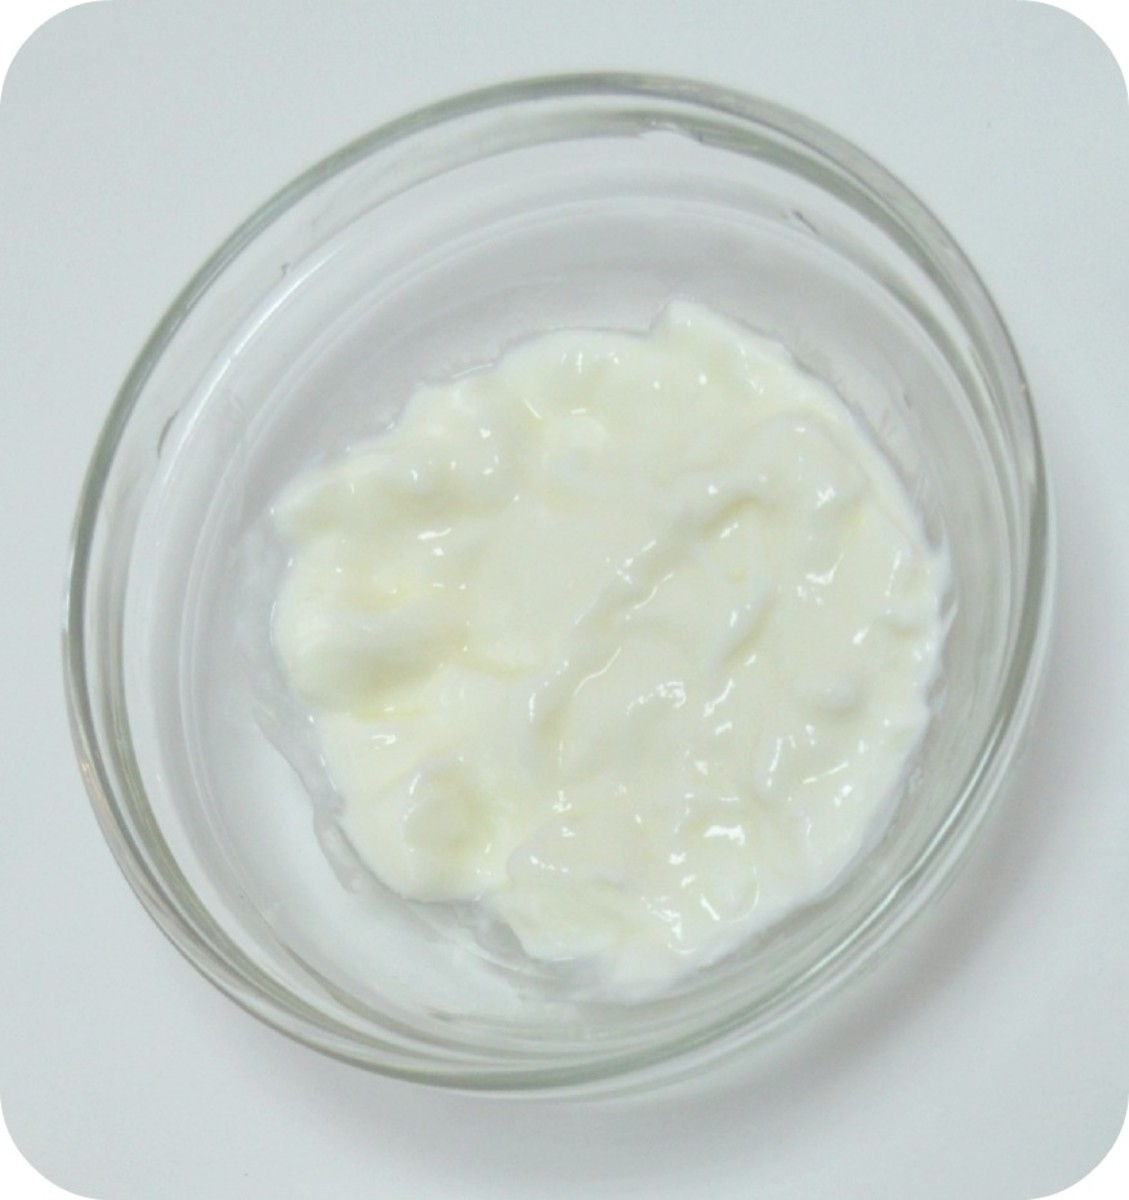 Yogurt can be applied topically on skin too, in face masks and face scrubs